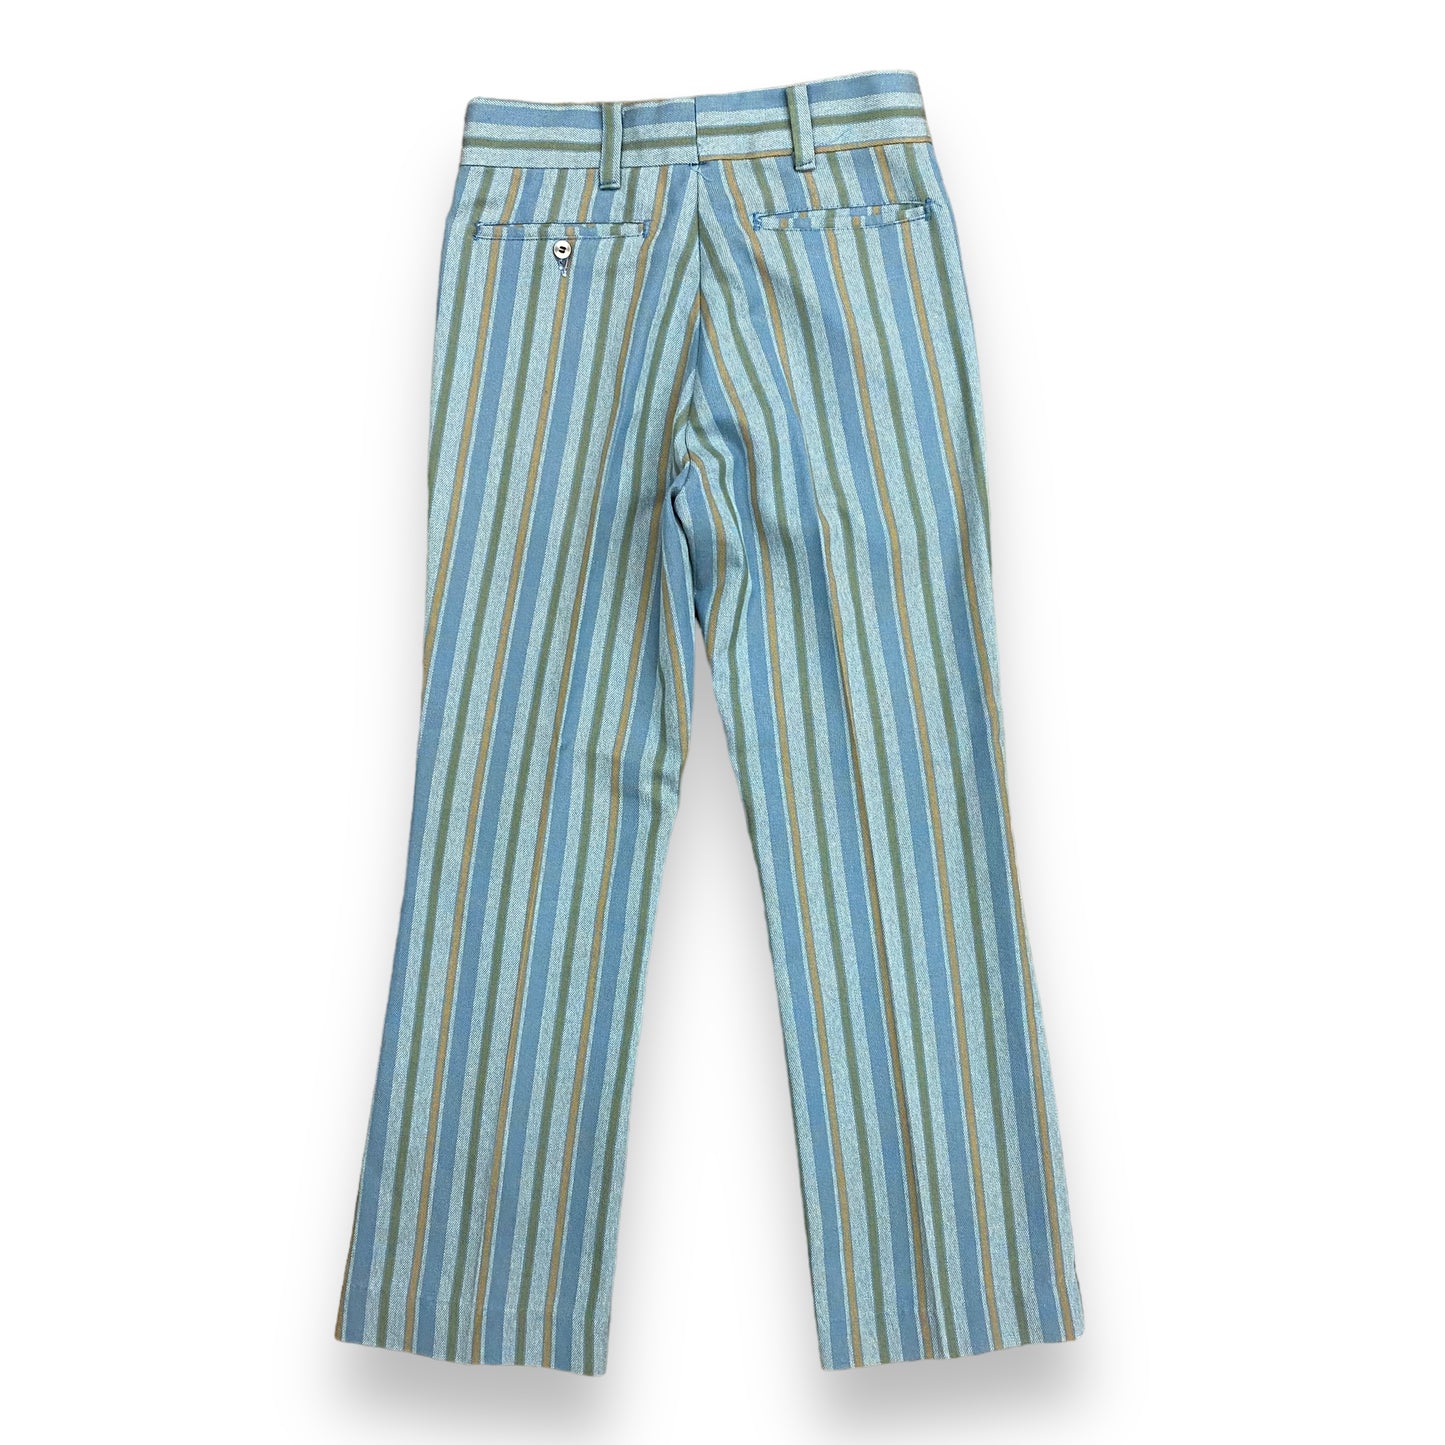 Vintage Billy the Kid Striped Pants - 26"x25"